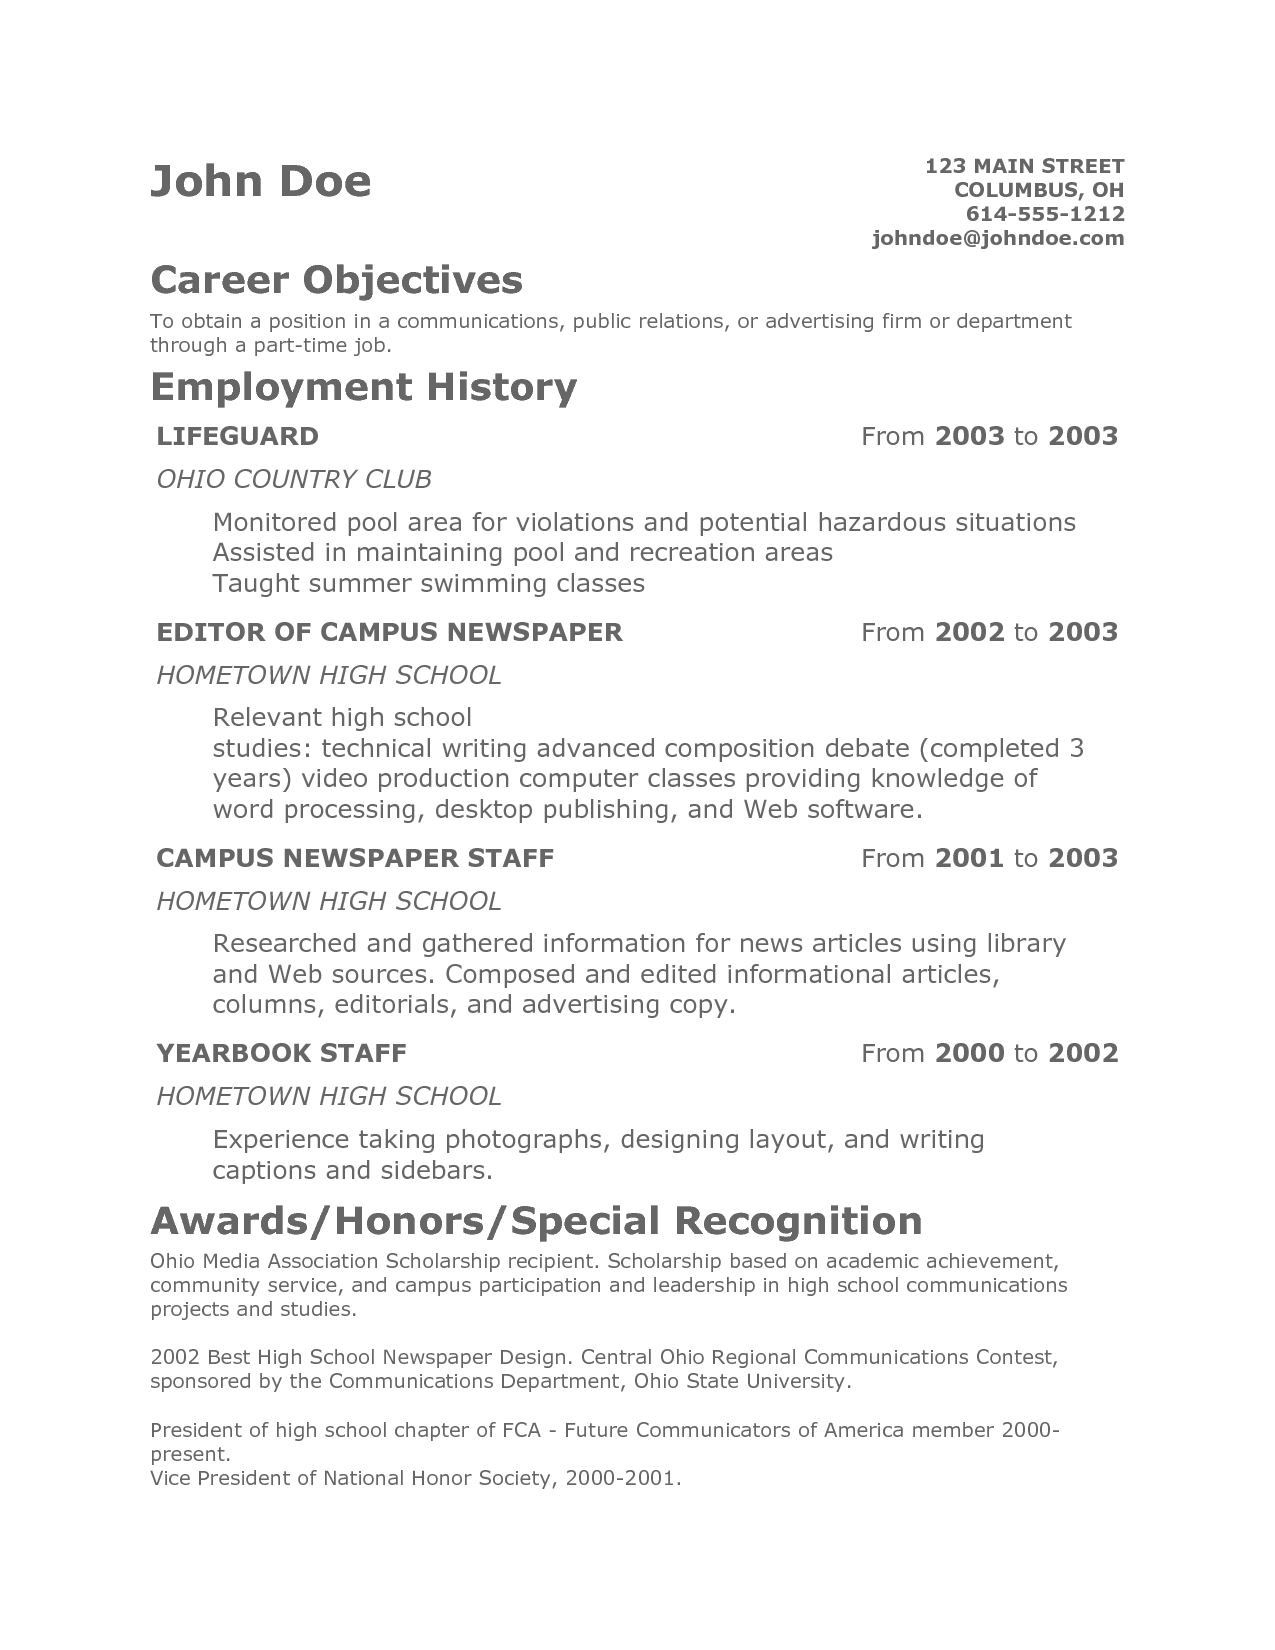 Resume Objective Examples  Teenage Resume Objective Duynvaerdernl